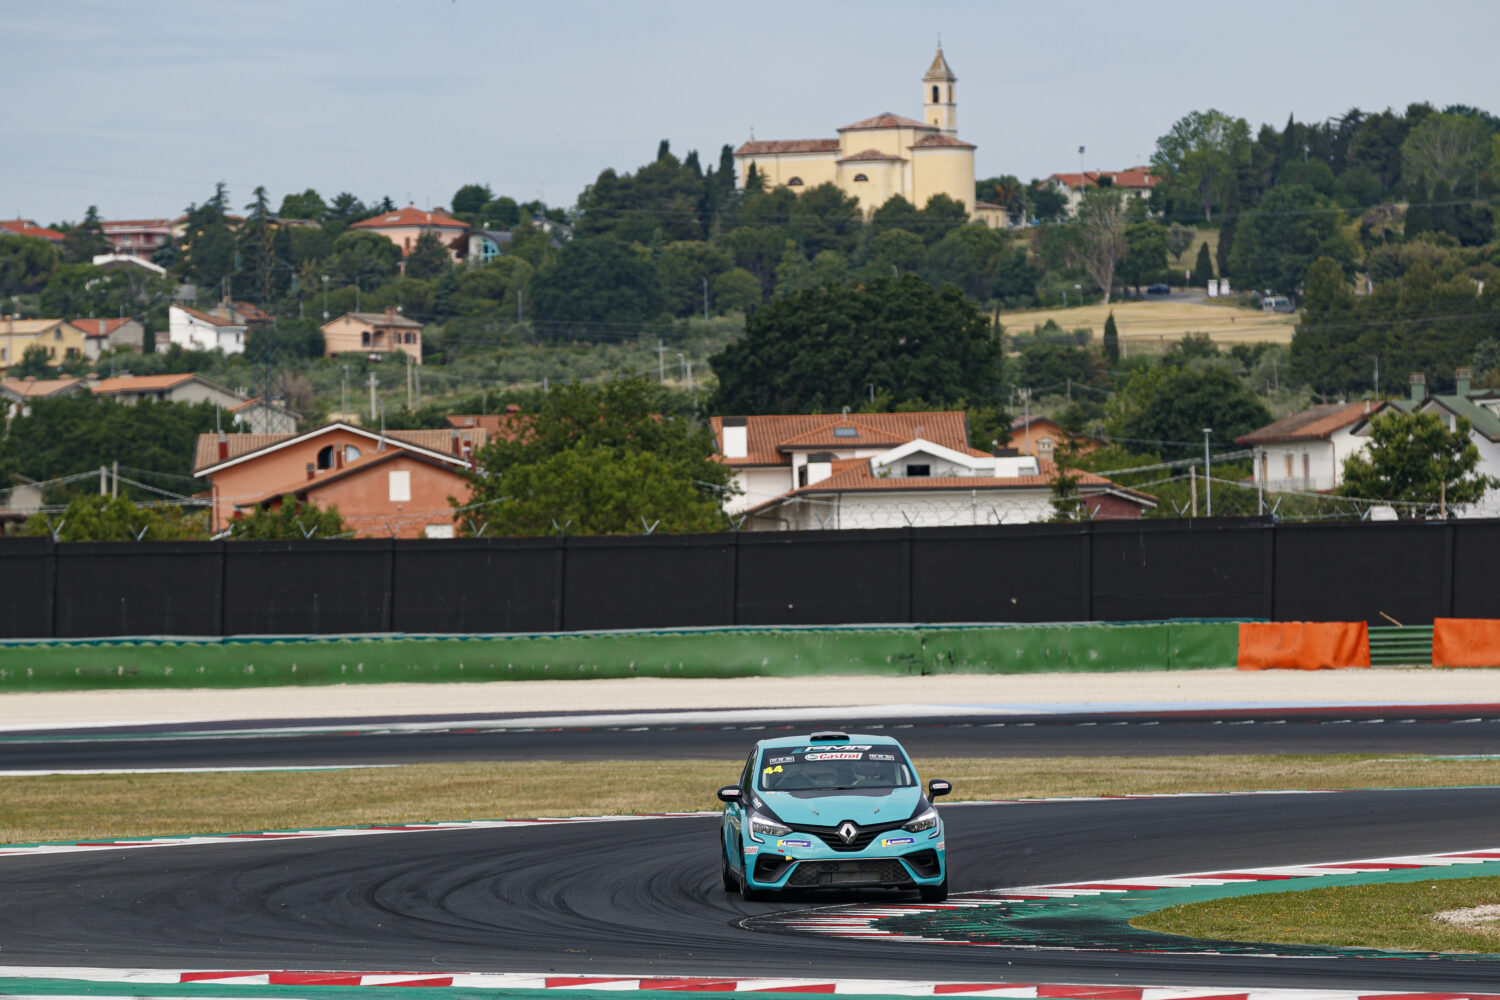 The Clio Cup action resumes at Misano